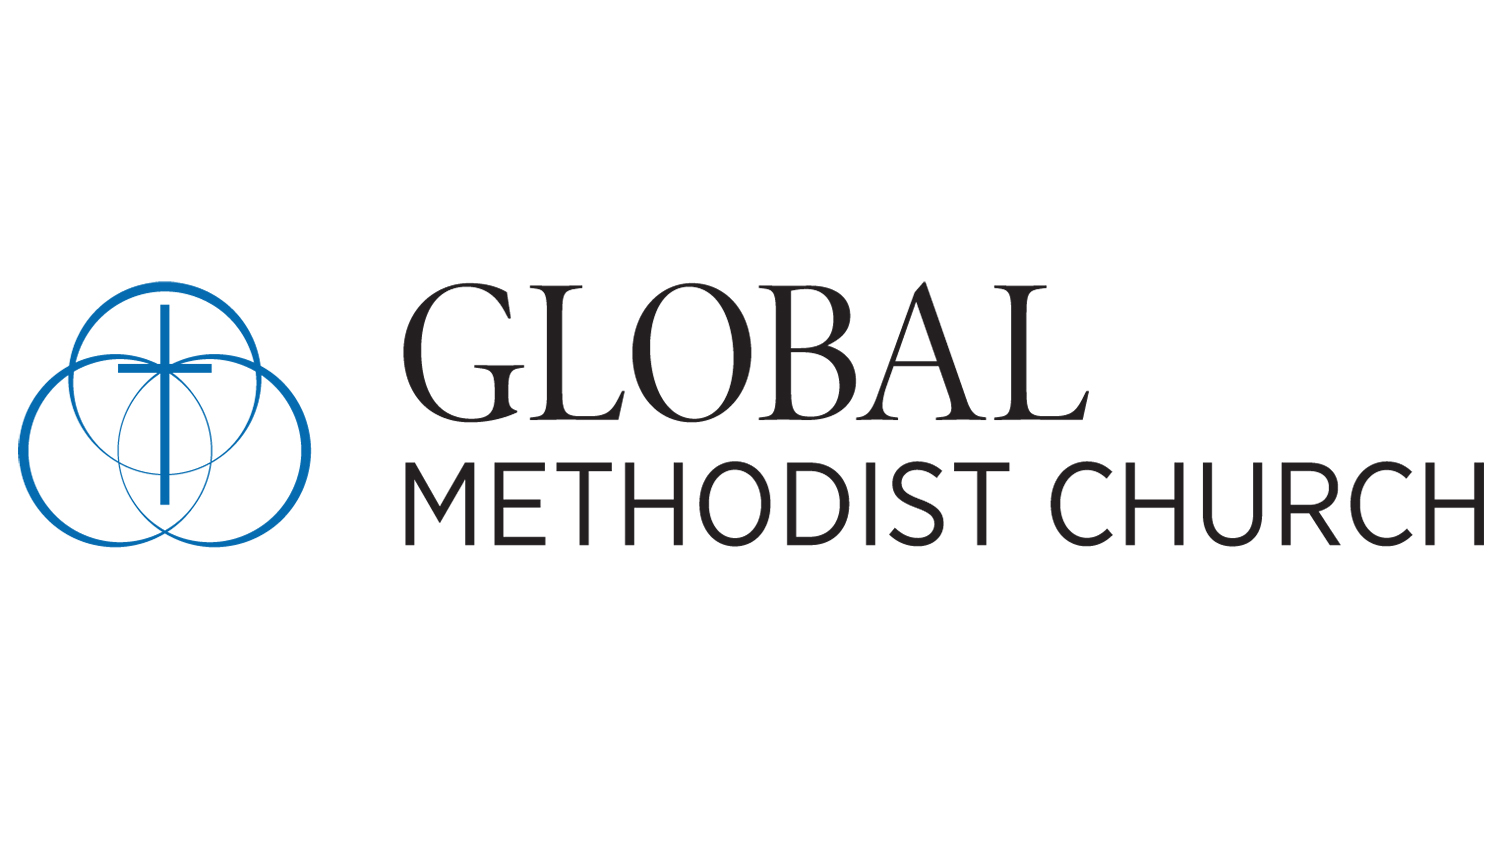 The name and logo of the new "Global Methodist Church,” which is splitting from the United Methodist Church. Image courtesy of the Global Methodist Church